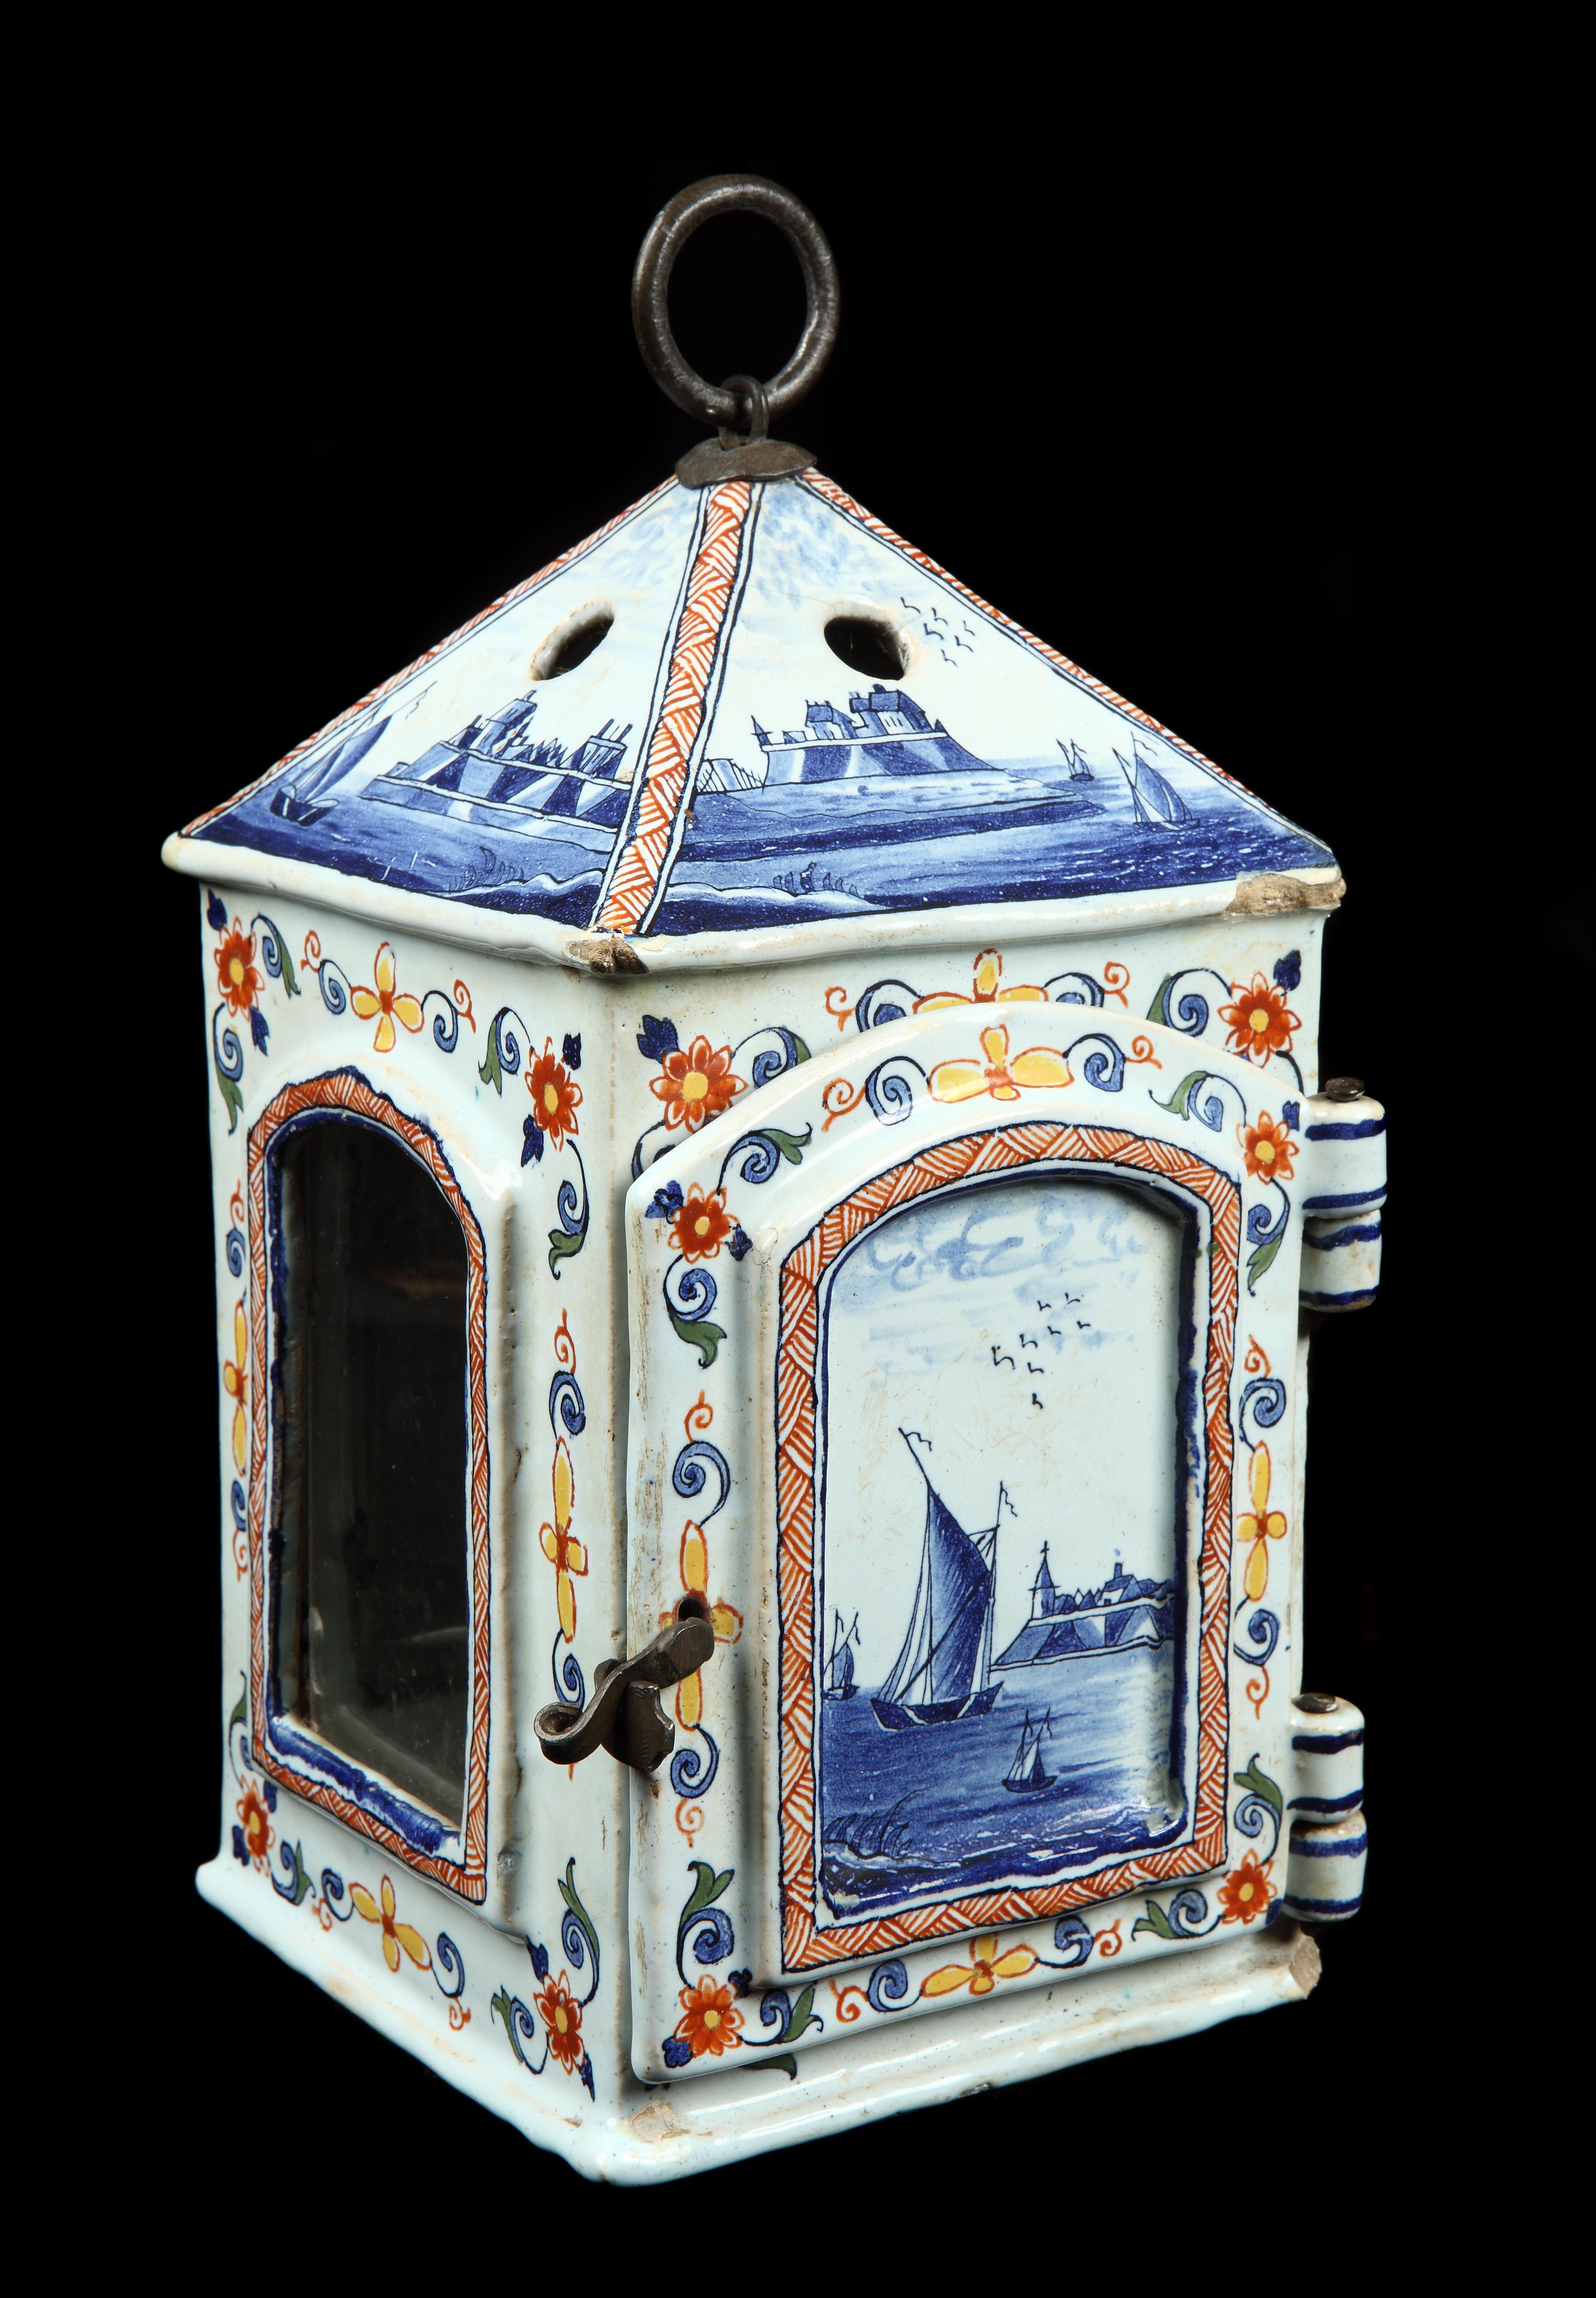 This charming lantern decorated with typical Dutch estuary scenes is a rare survival.  Although they must have been made in large quantities as evidenced in many Dutch Old Masters their medium makes them very vulnerable.  The painting on this